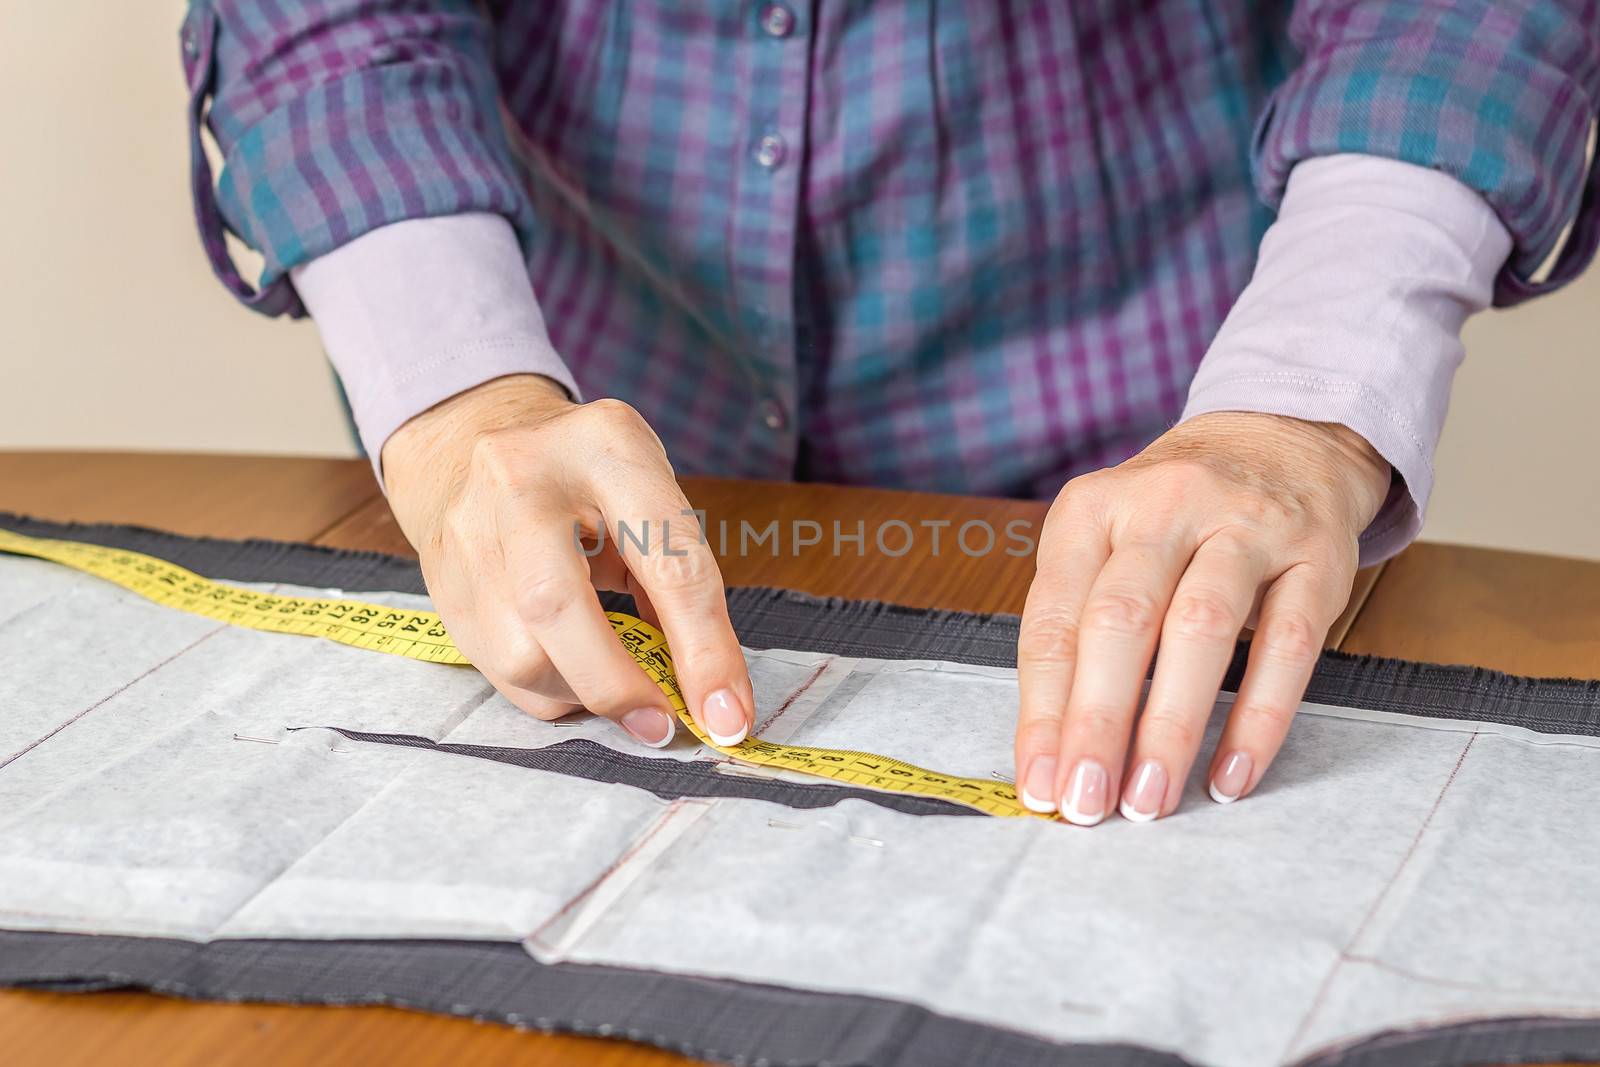 Dressmaker measuring tailor pattern on the table by doble.d